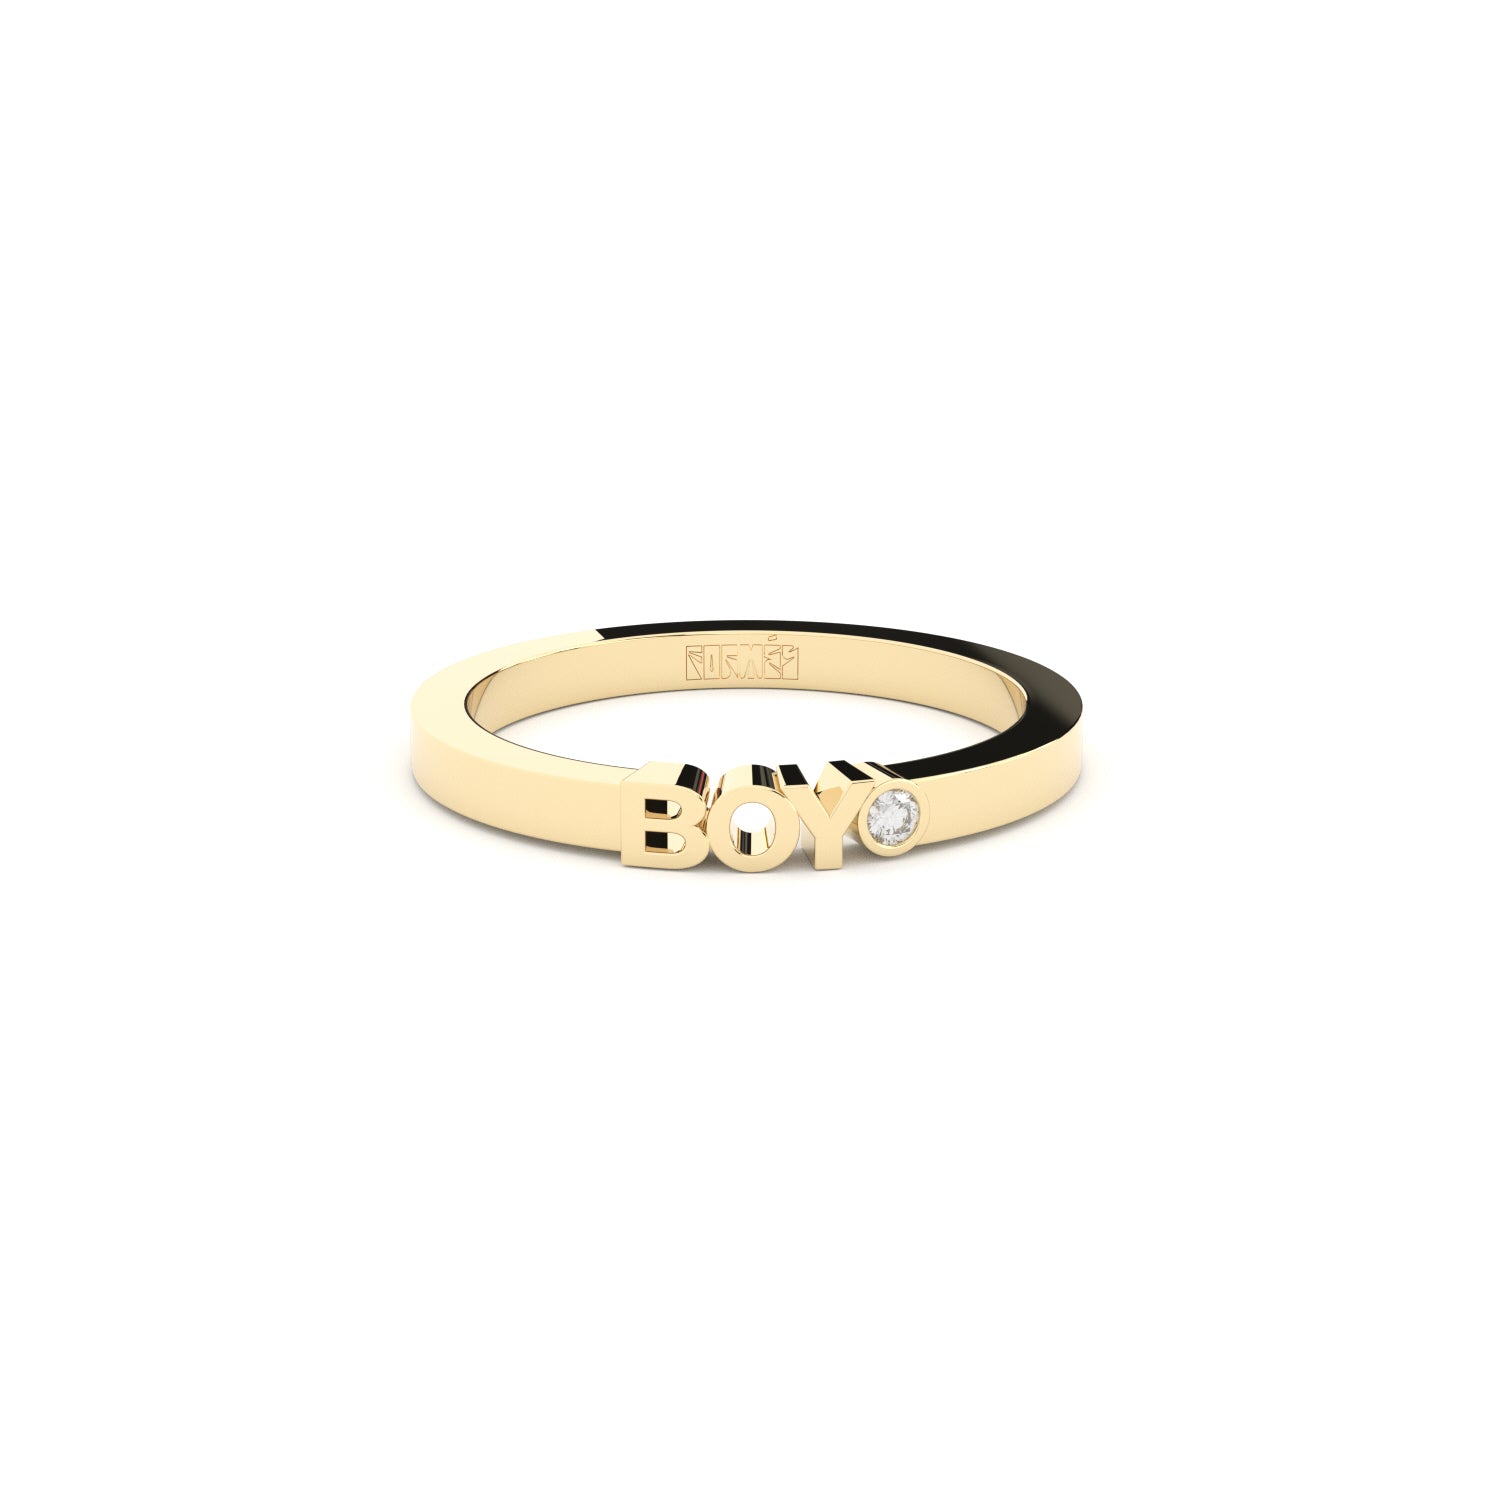 22K Gold Ring For Baby Boy - BjRi16695 - 22K Gold Ring for boys designed  with machine cuts in matte and shine finish combination.